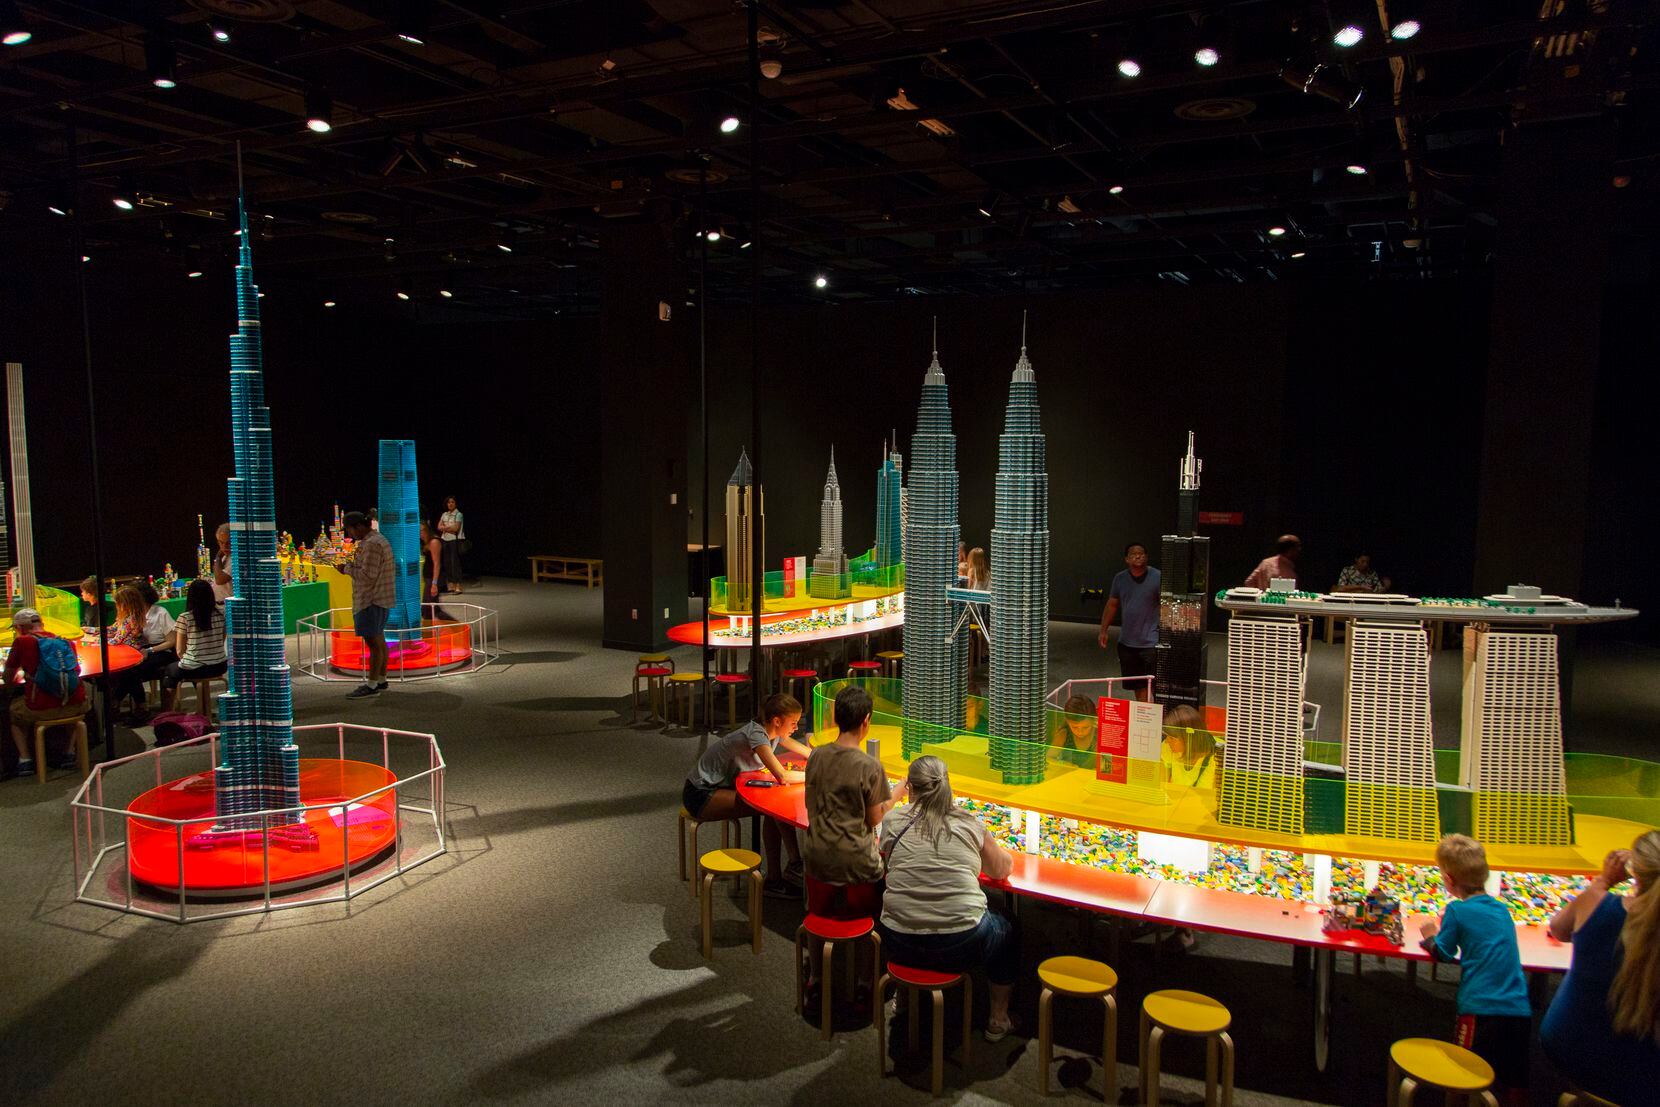 The Perot Museum of Nature and Science will host the touring exhibition "Towers of Tomorrow with Lego Bricks" from Sept. 24, 2021, to April 24, 2022. The exhibit will feature 20 iconic skyscrapers made from Lego bricks and chances for children to build their own structures with Legos. 